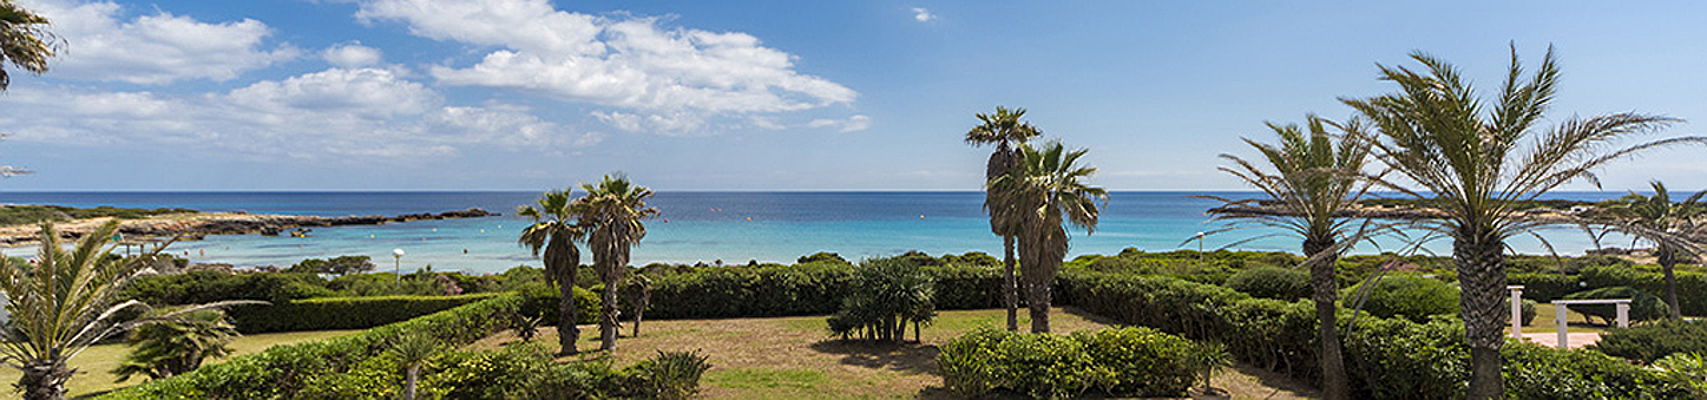  Mahón
- Menorca - your dream location for the purchase of a home!